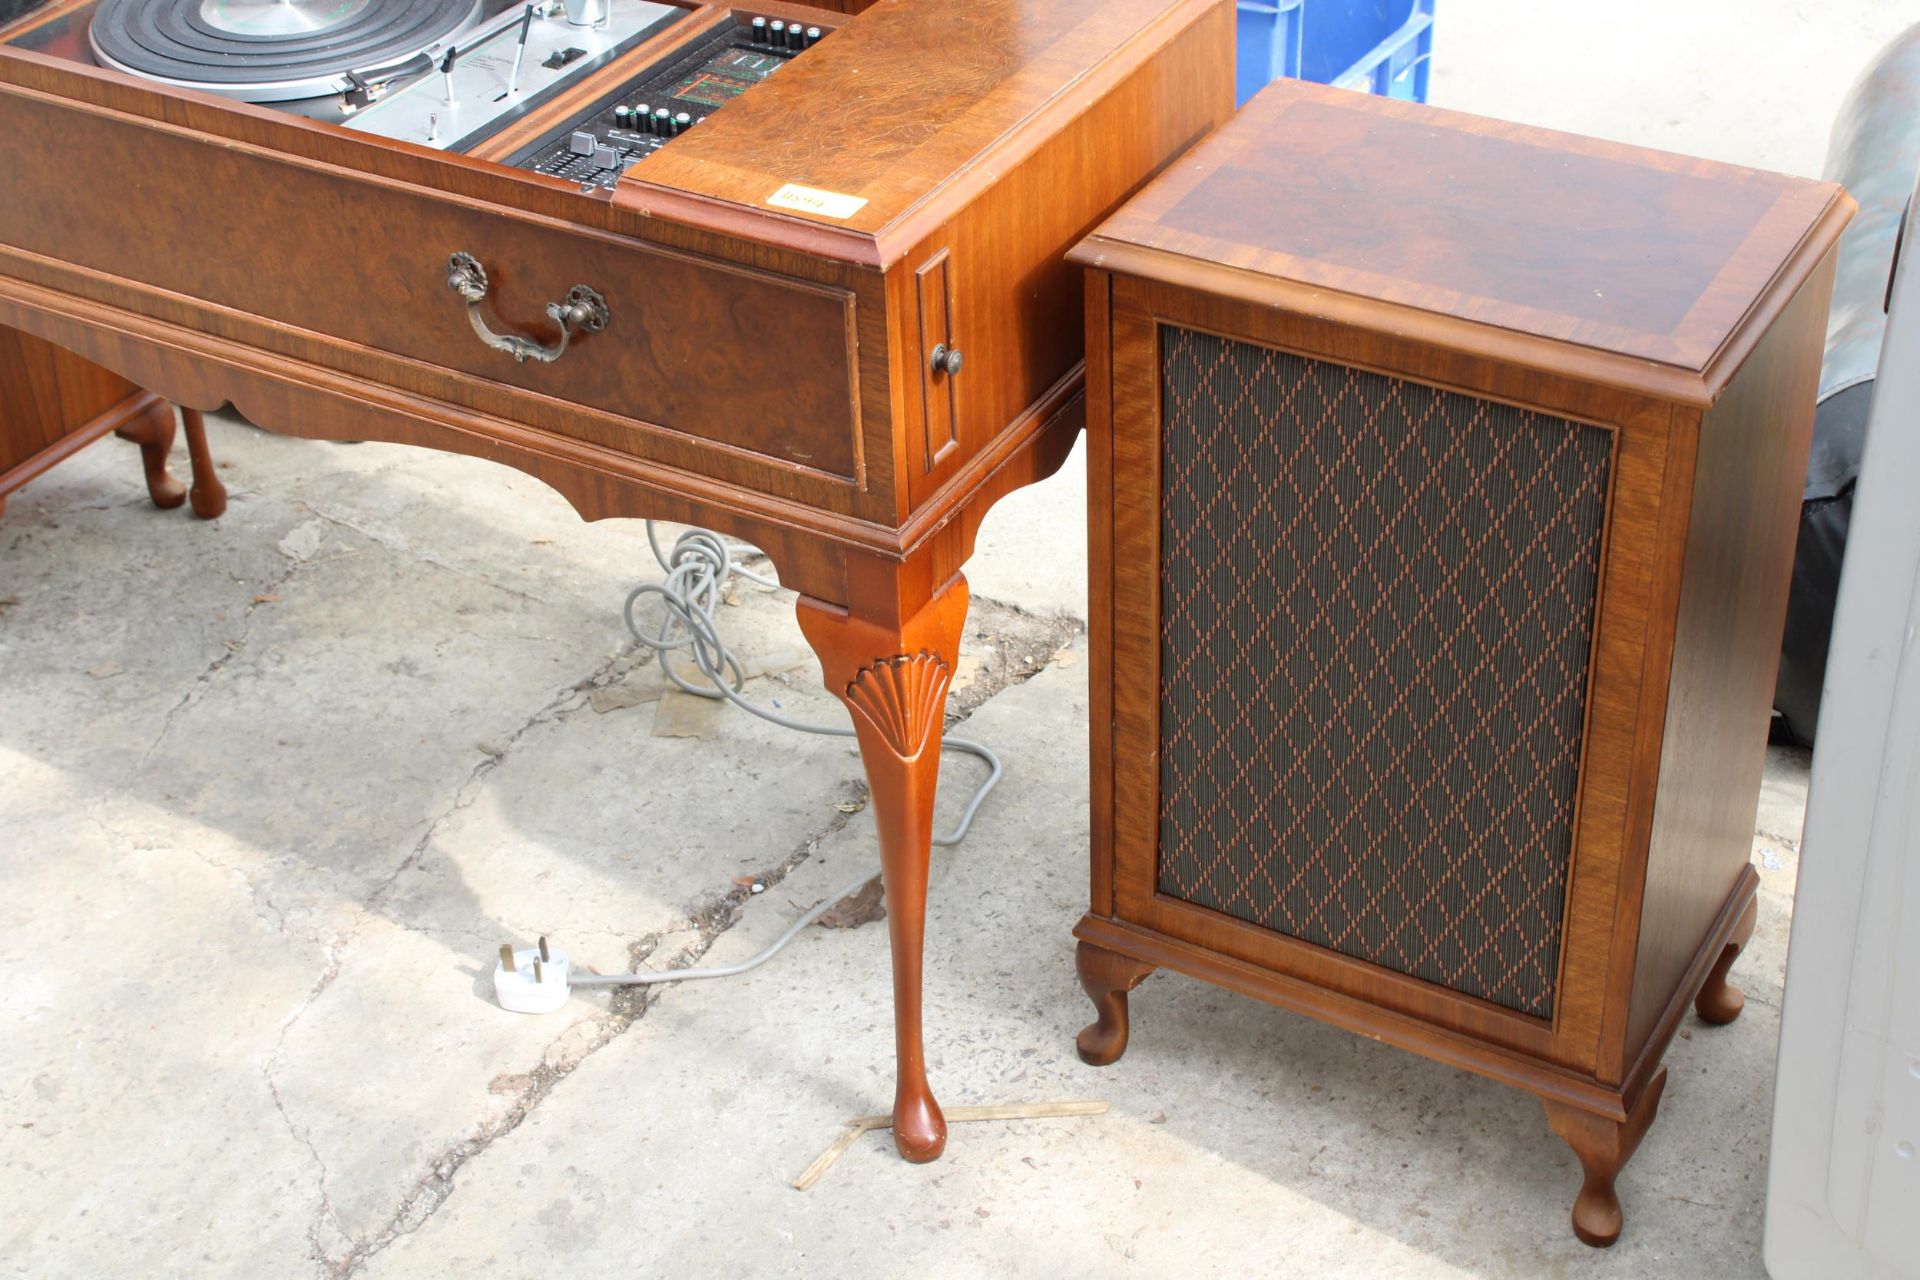 A VINTAGE MID CENTURY RADIOGRAM WITH A DRAYTON DECK AND SPEAKERS - Image 3 of 6